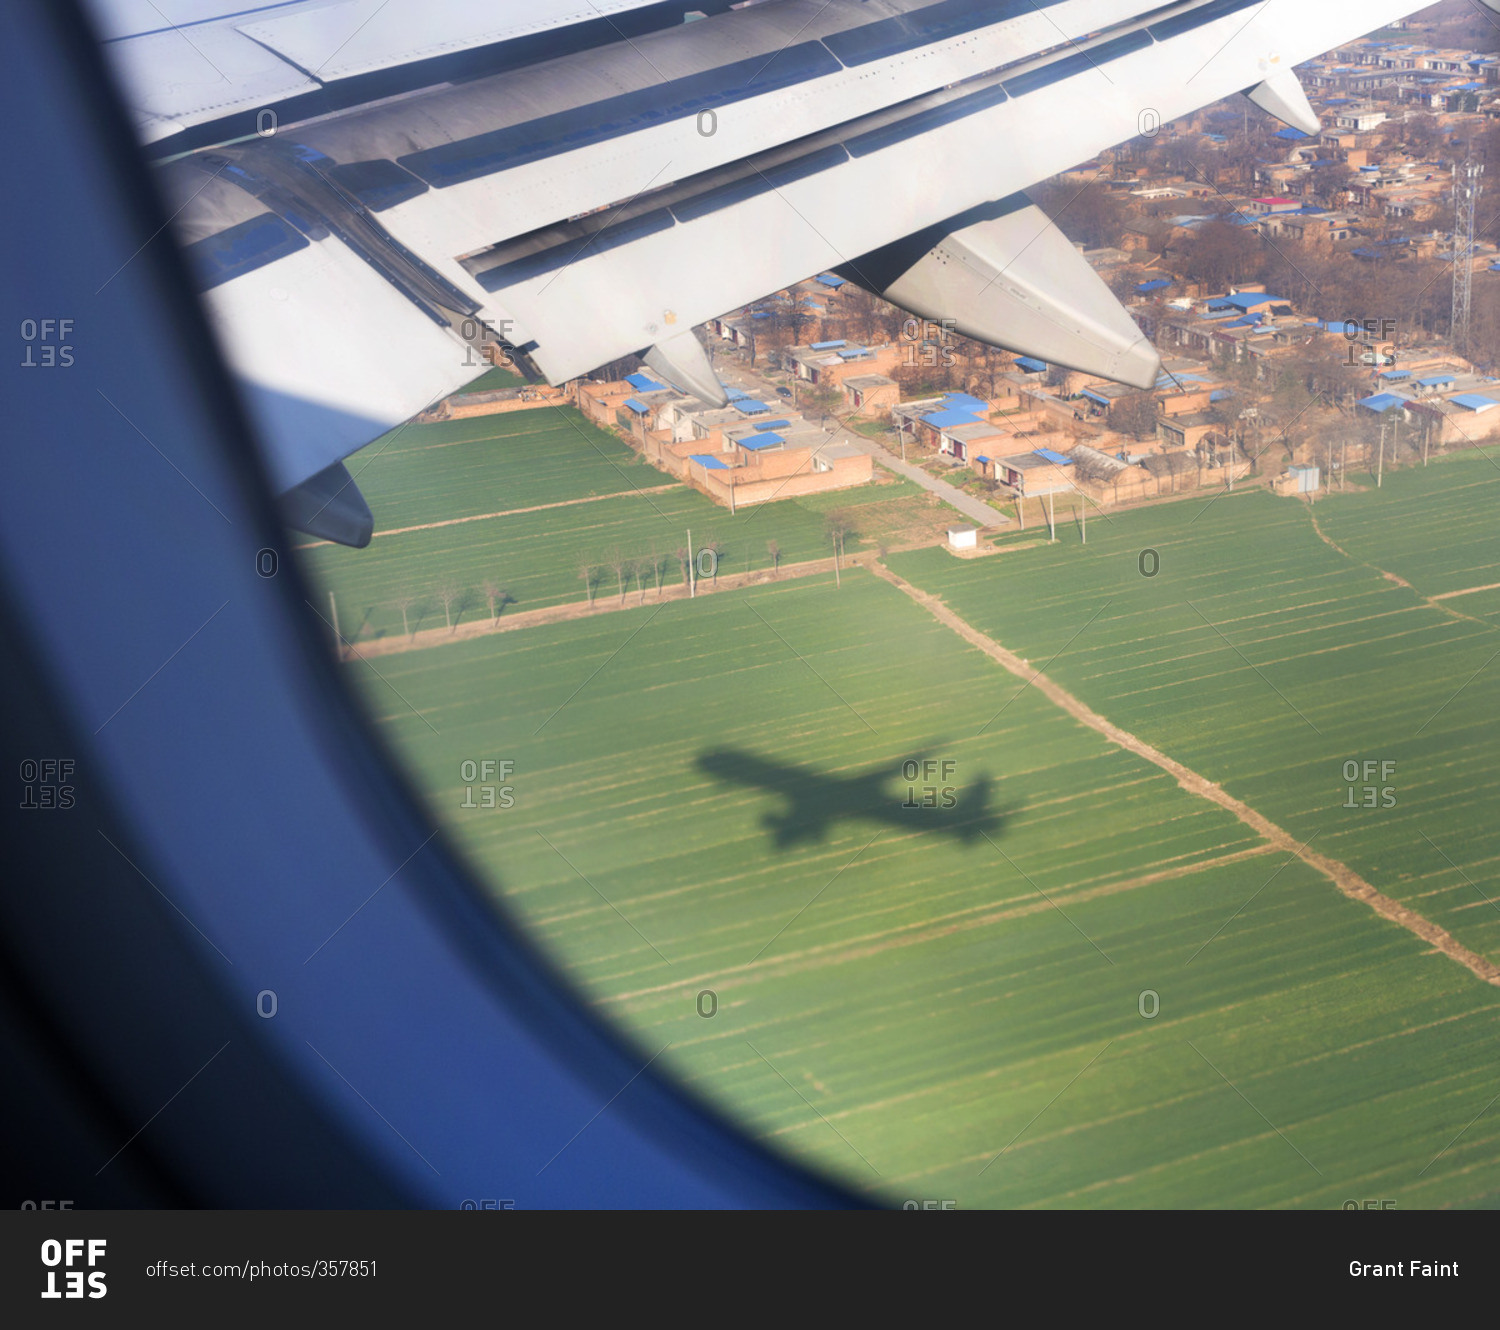 An airplane casting a shadow on a field as it approaches Shanghai Pudong International Airport in Shanghai, China